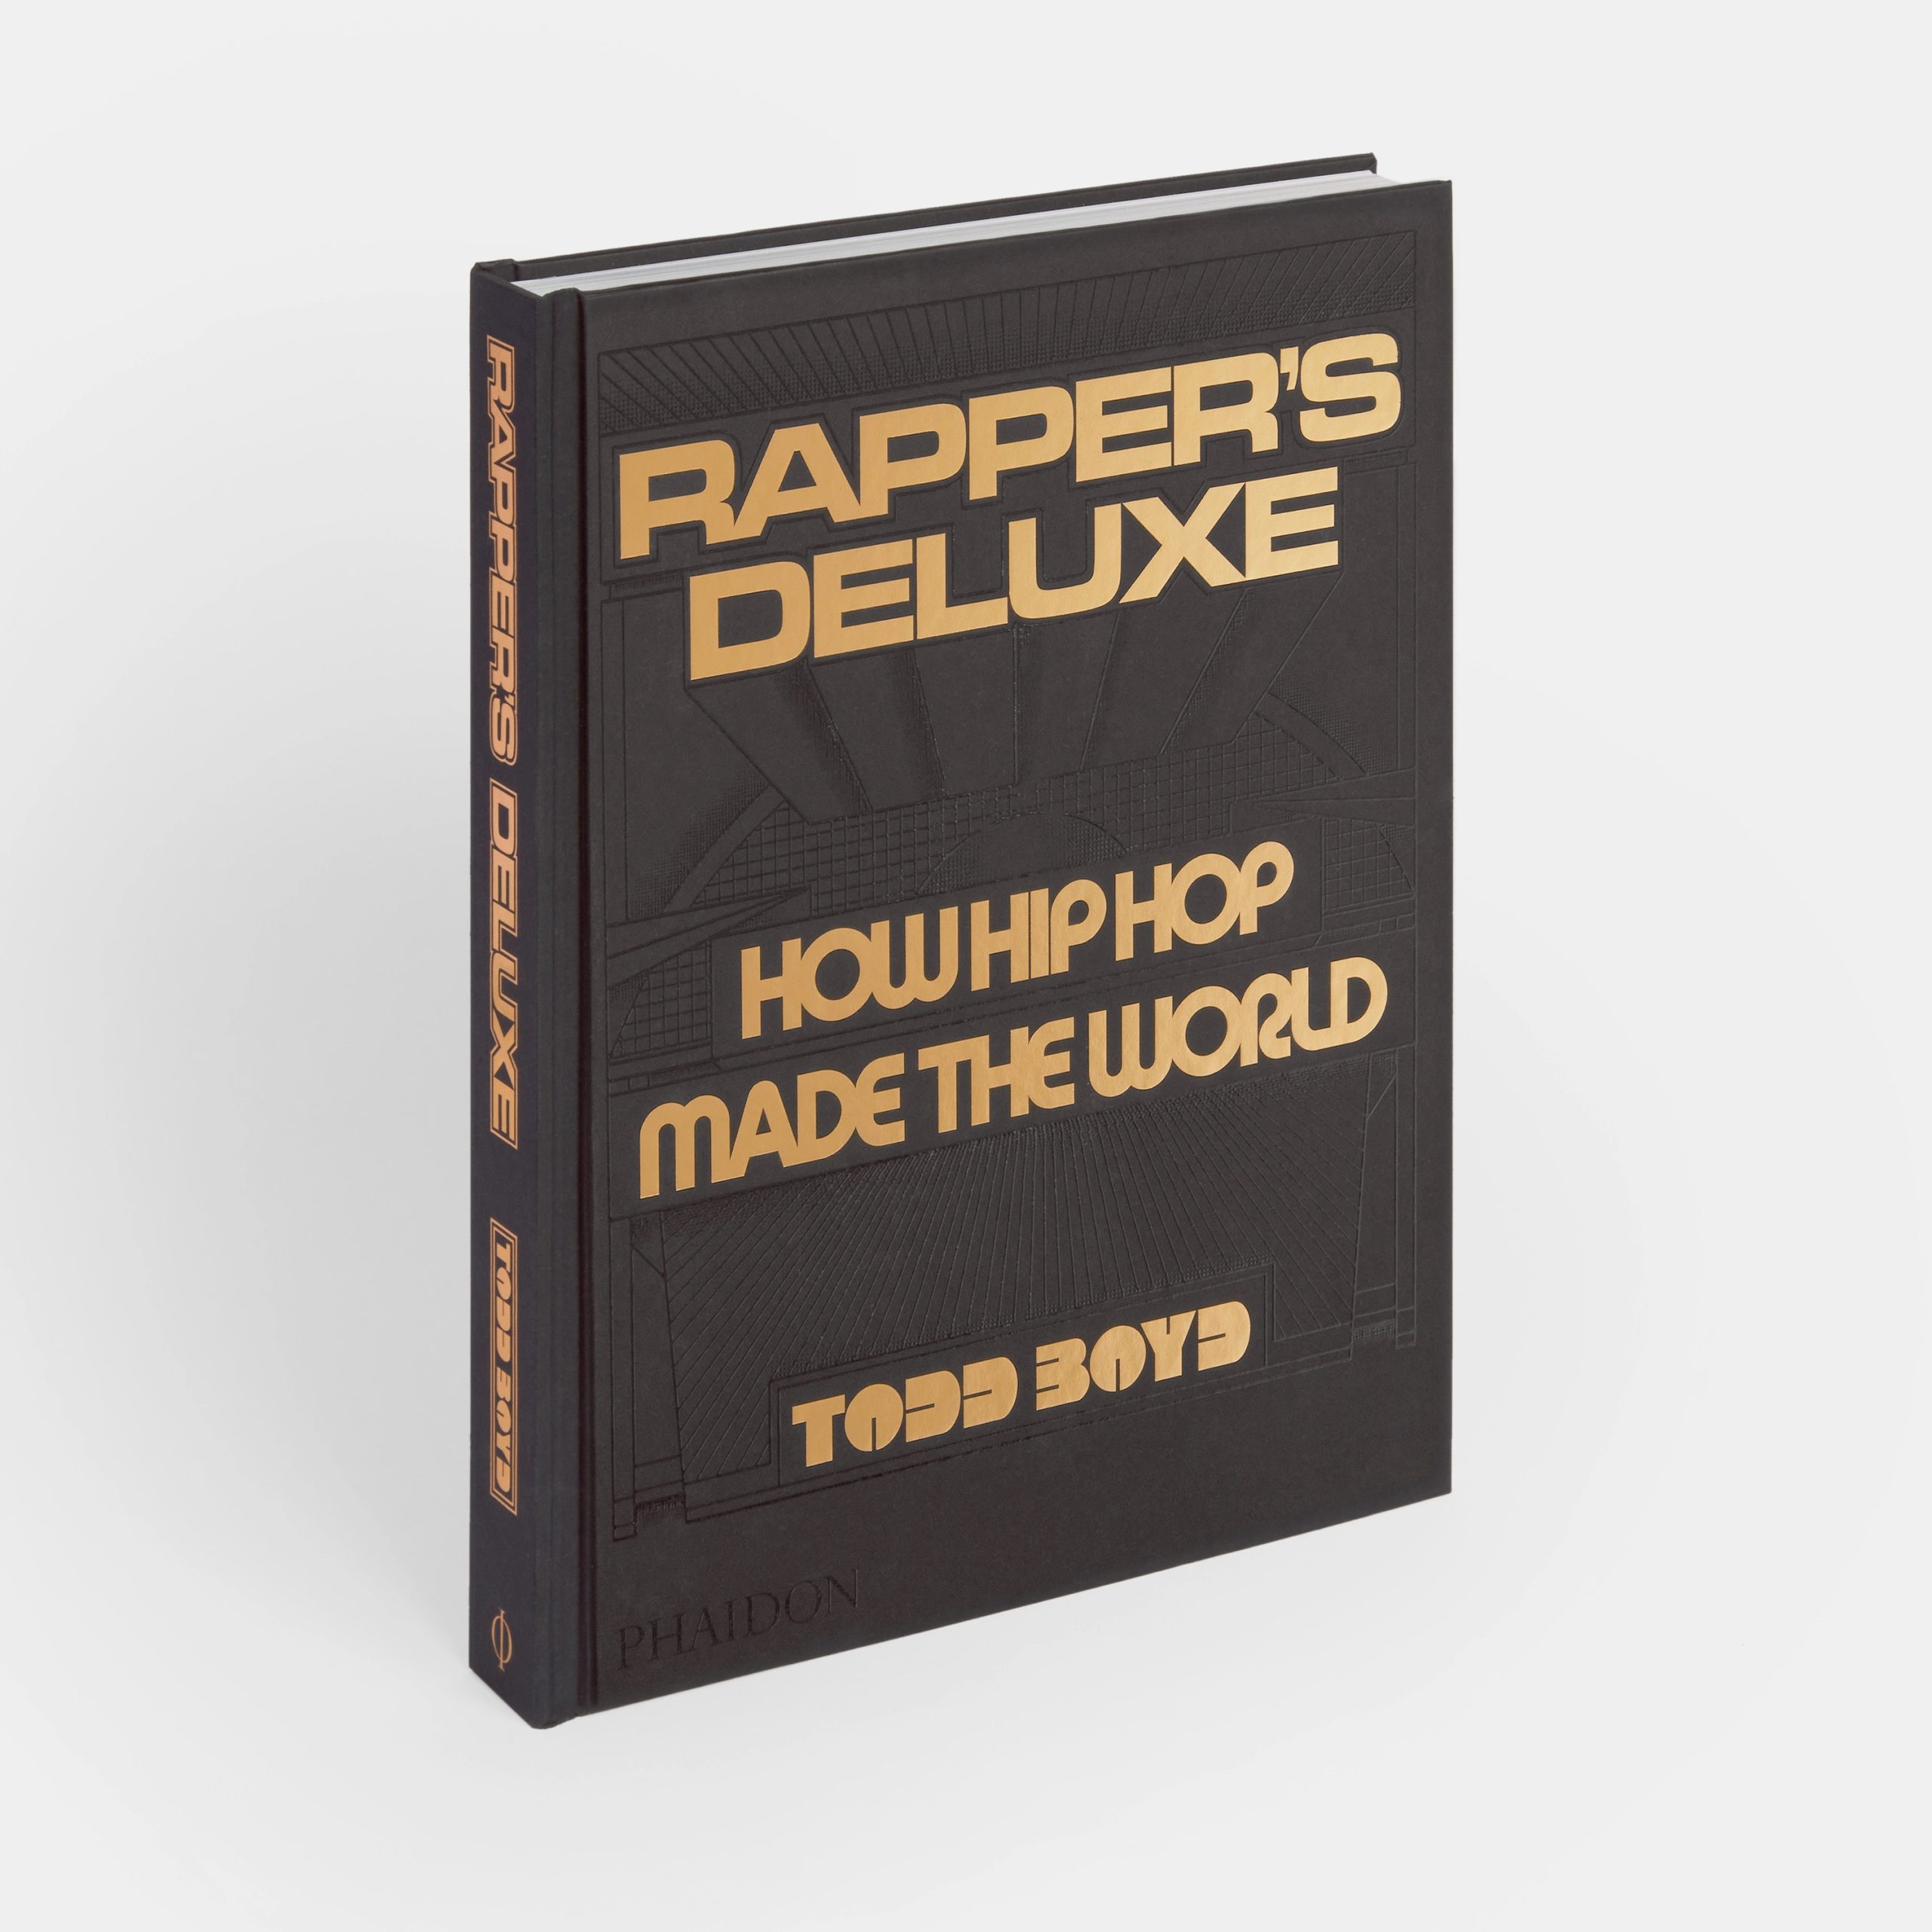 Rapper’s Deluxe: How Hip Hop Made The World